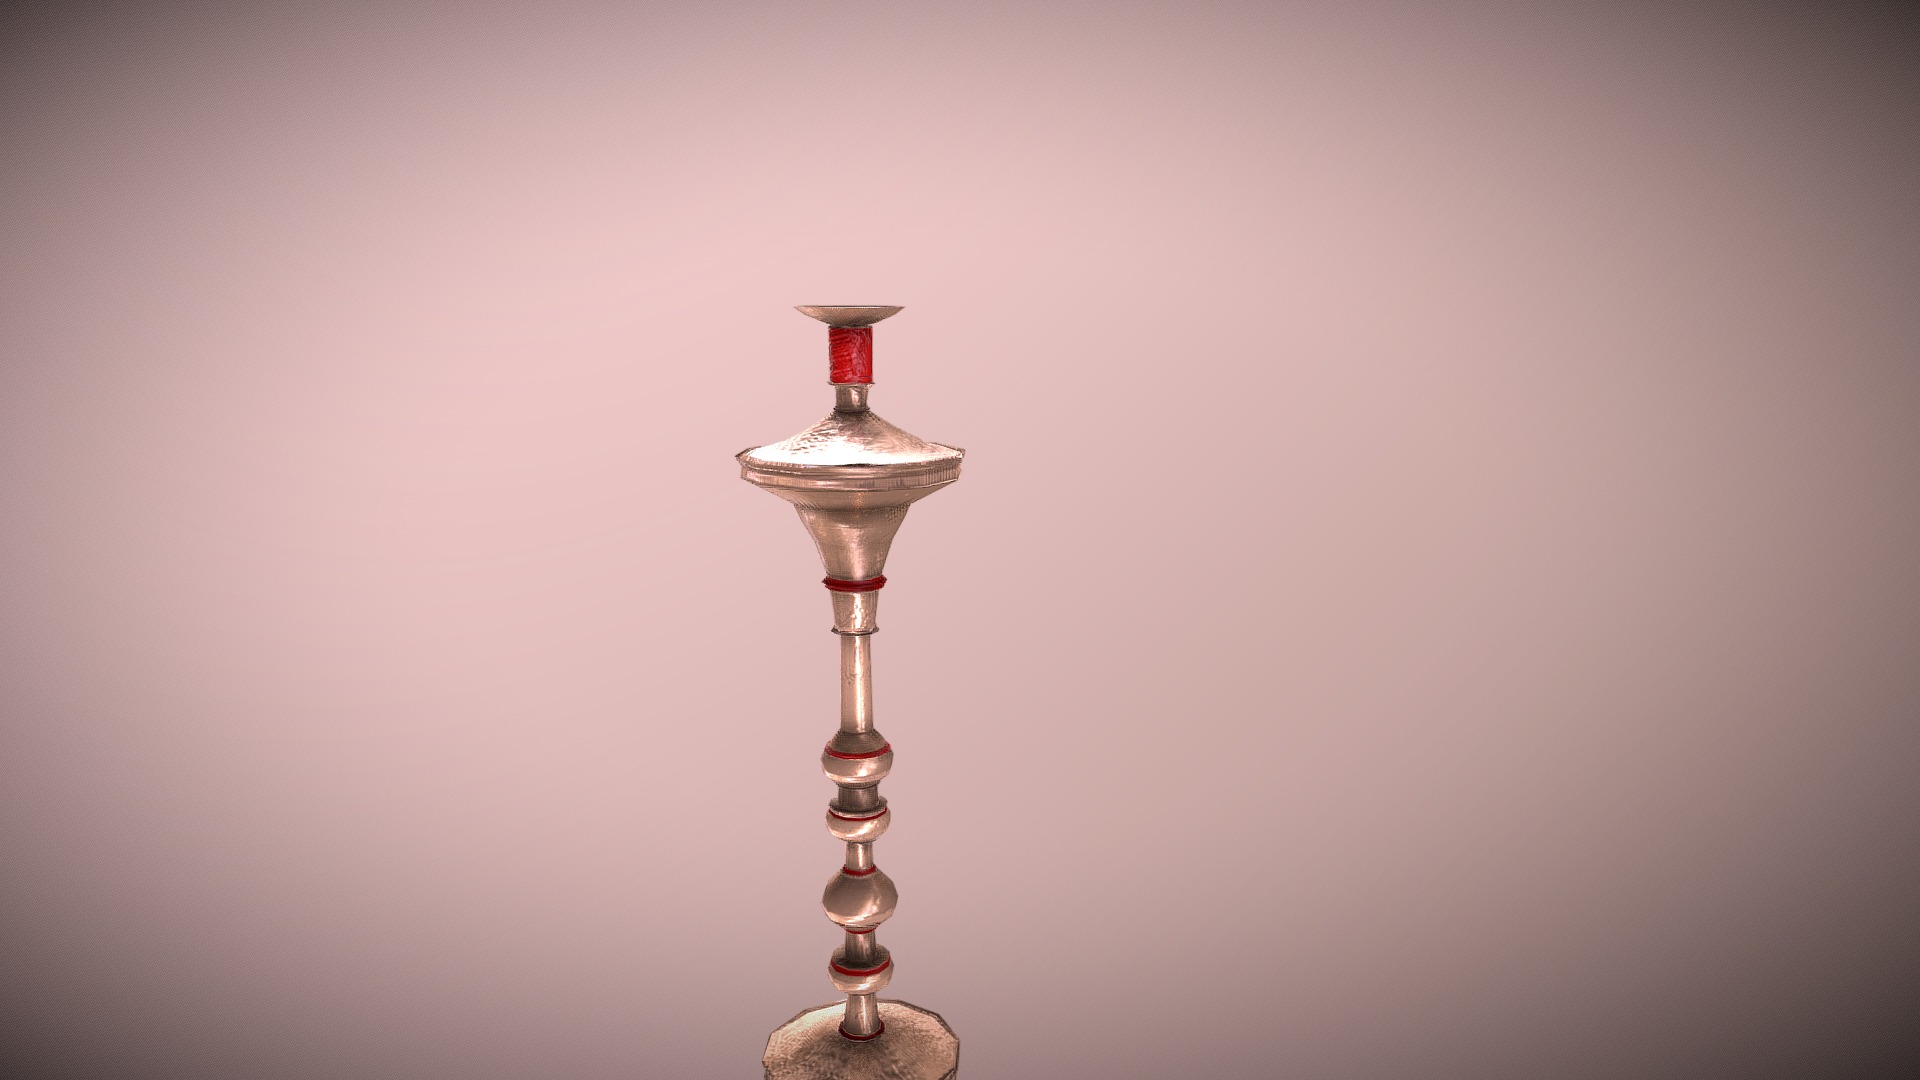 One of the 4 candle stick designs for a church I created - Candle Stick - 3D model by Carly.Simmons 3d model